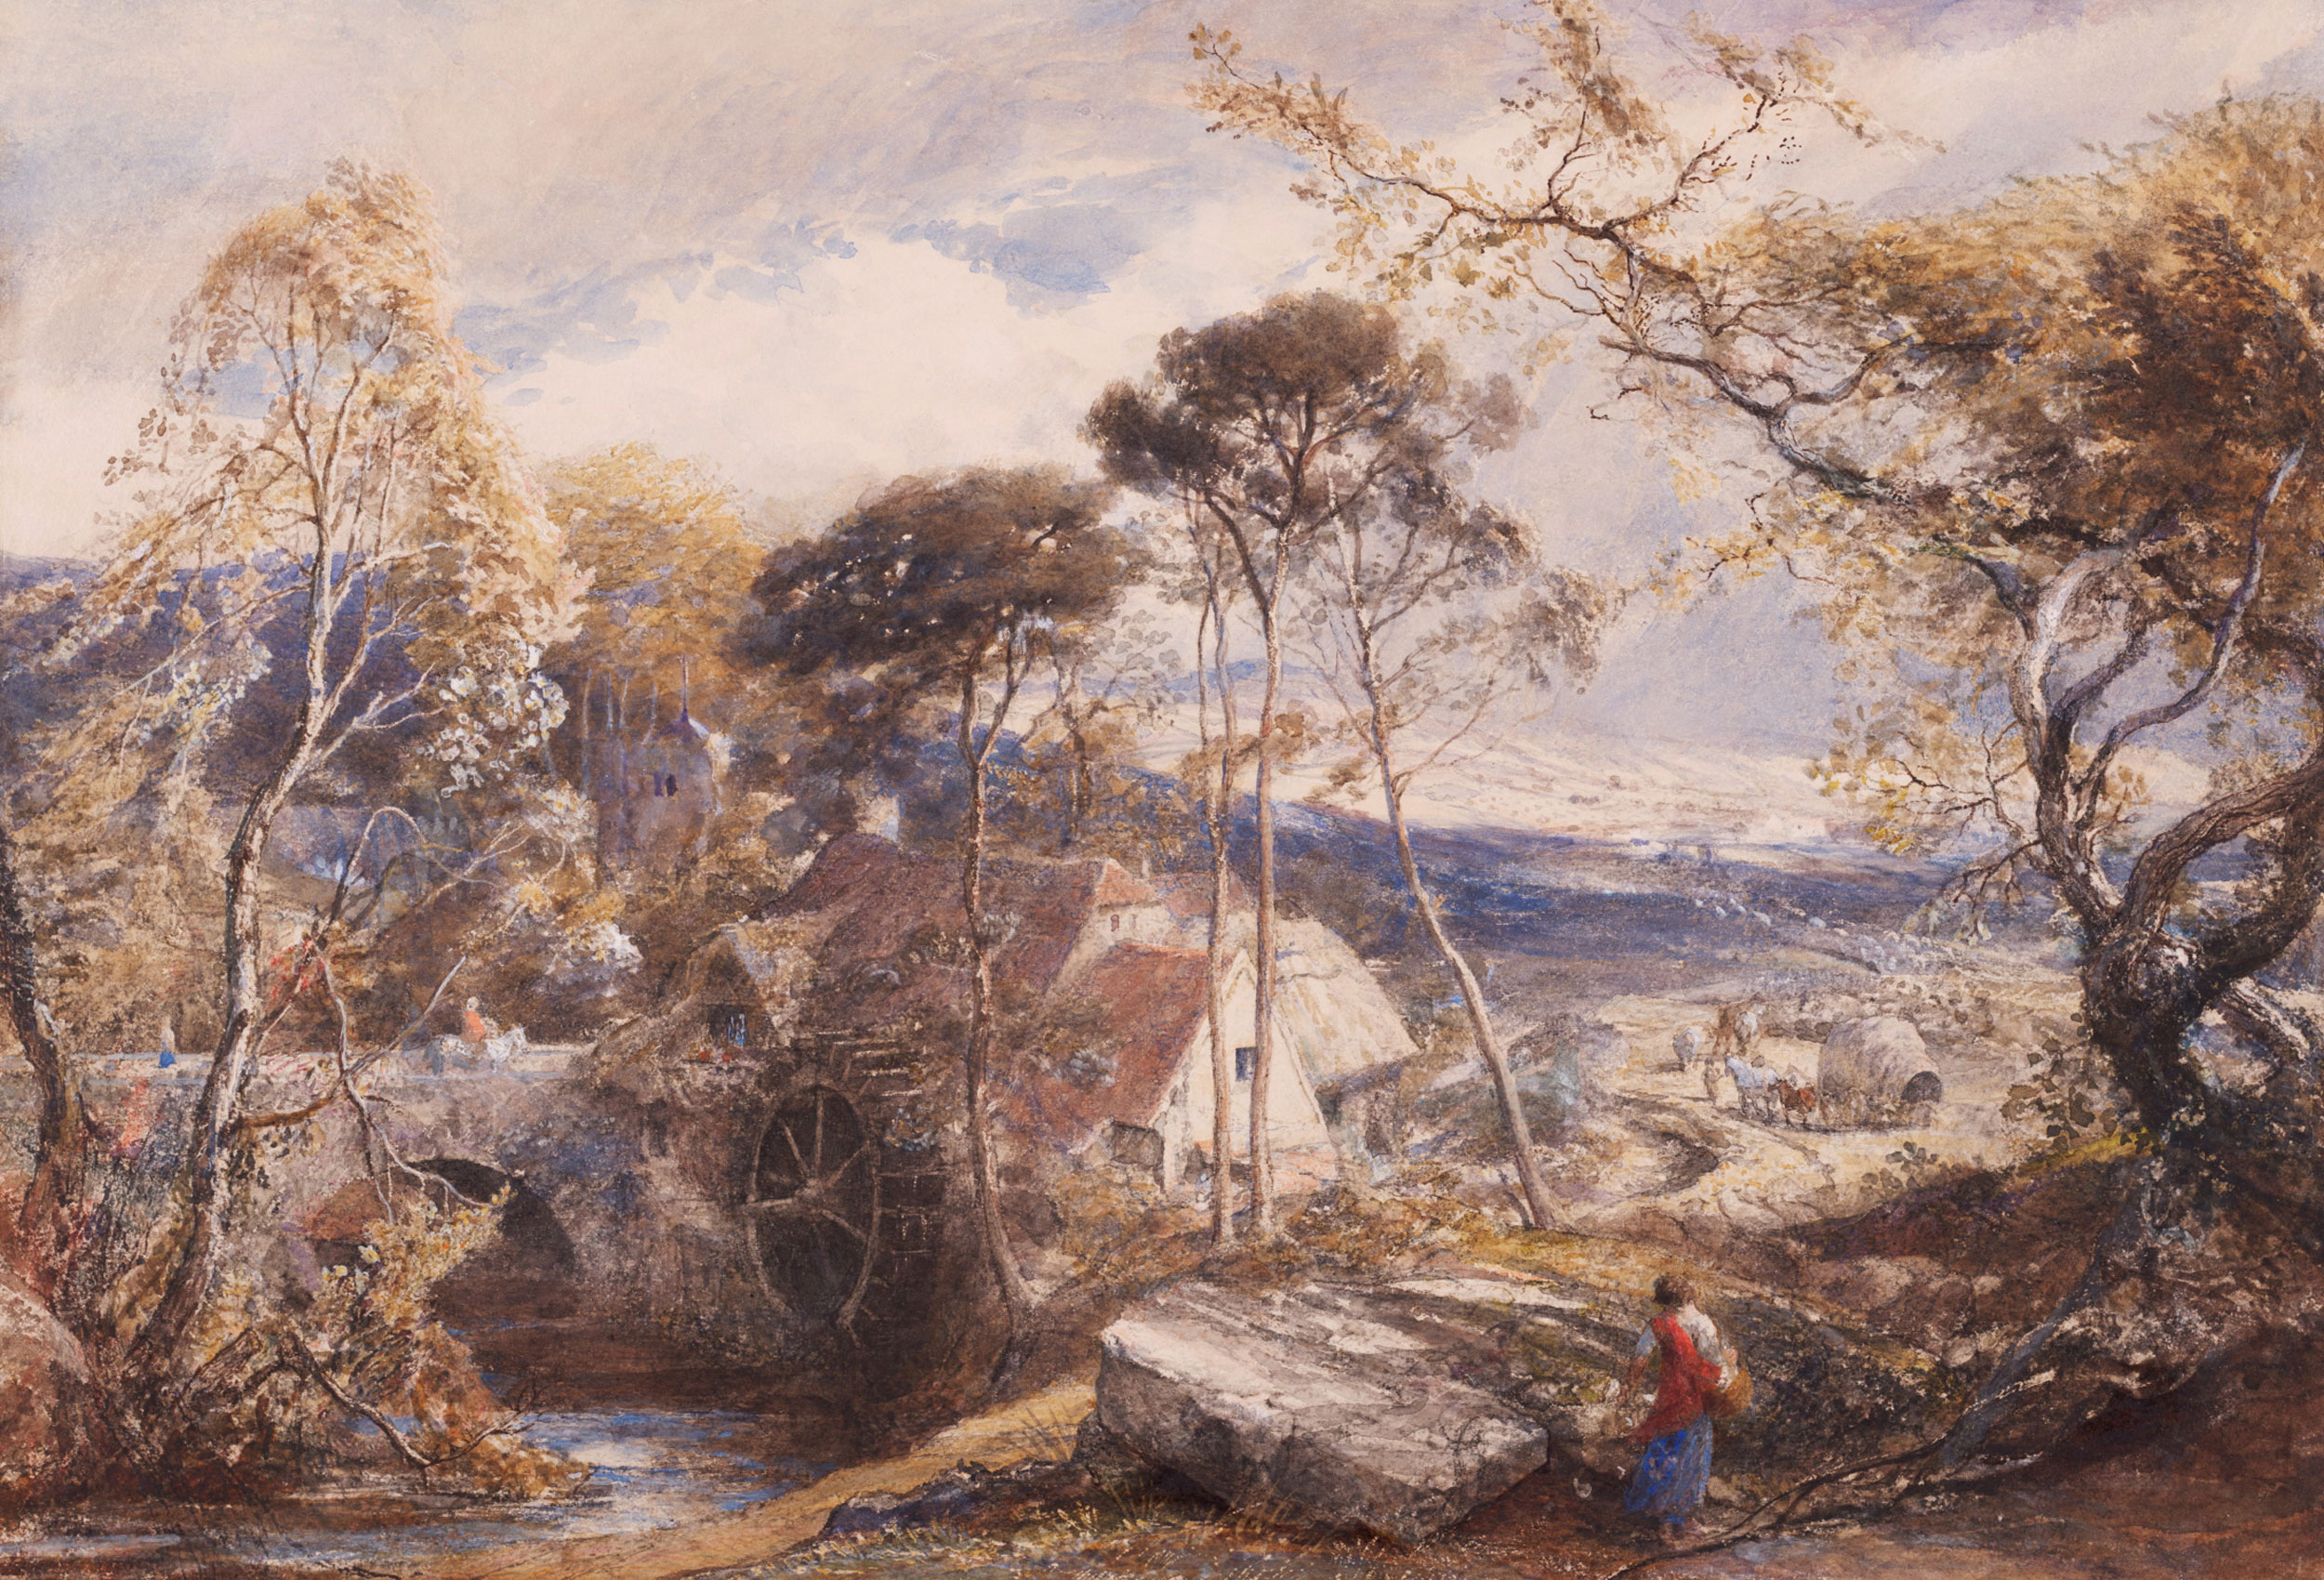 Samuel Palmer Landscape with watermill c1855 (detail), Art Gallery of New South Wales